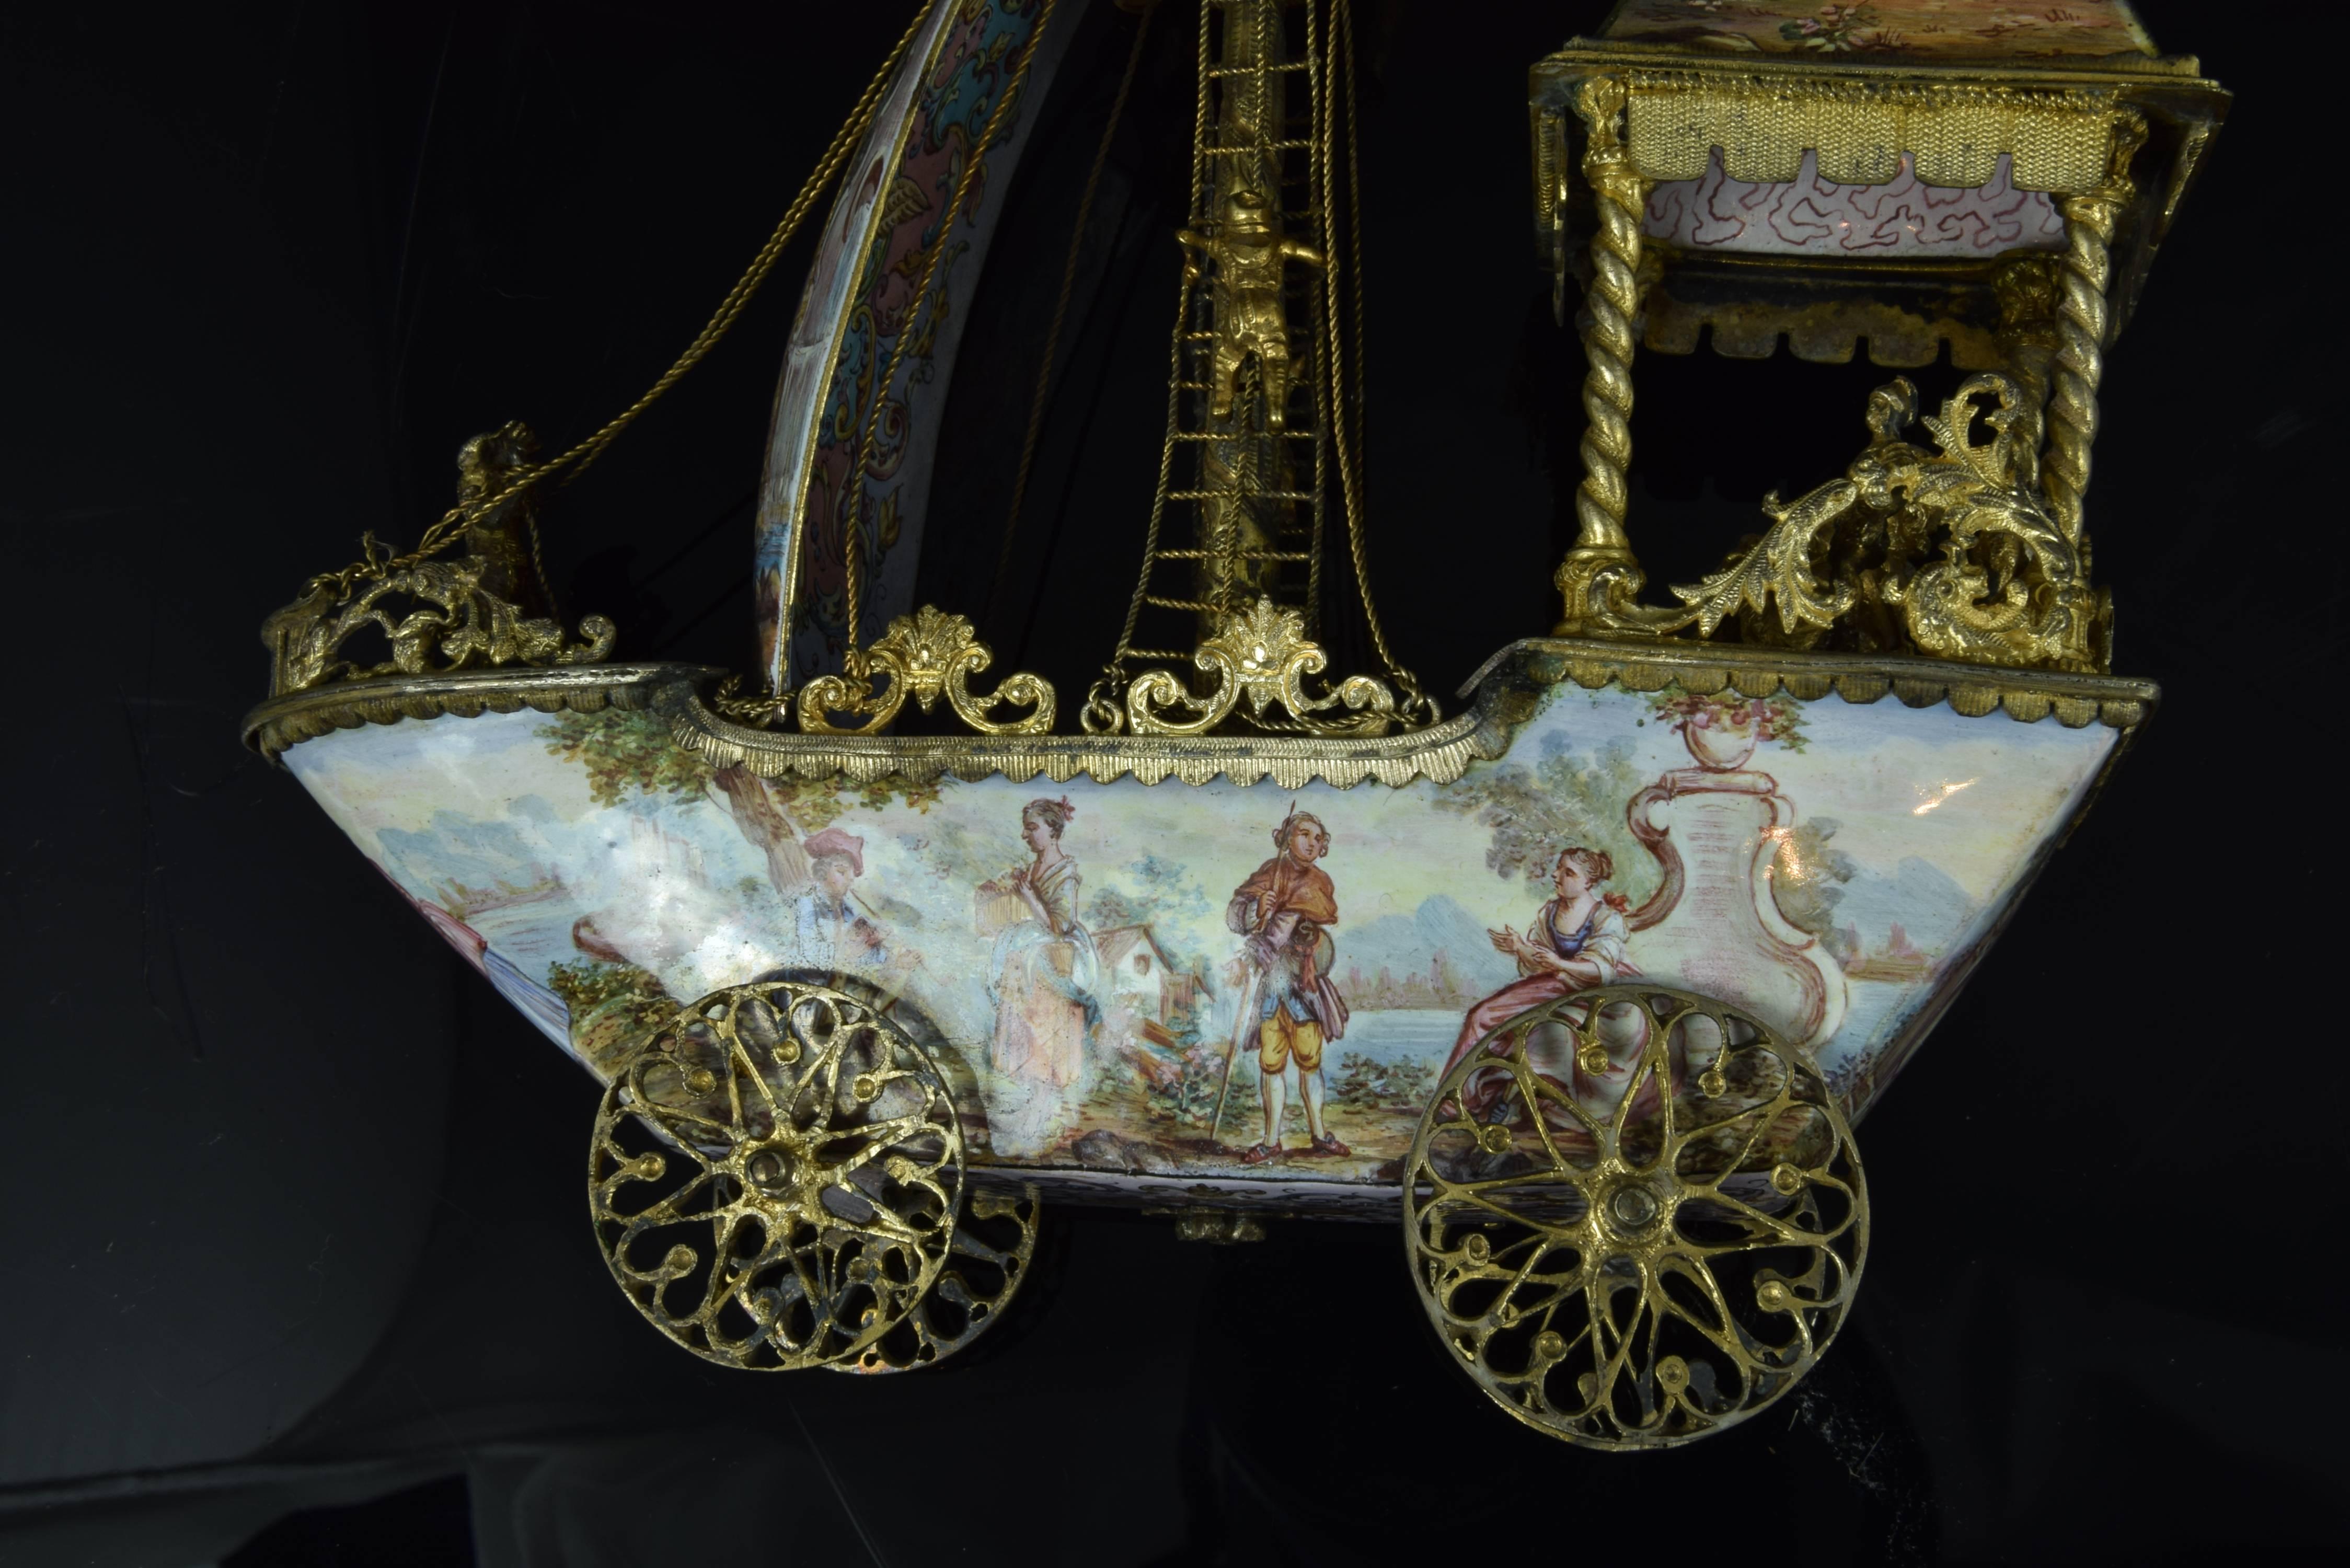 Viennese Enameled Boat, Gilt Silver and Enamel, 19th Century 2